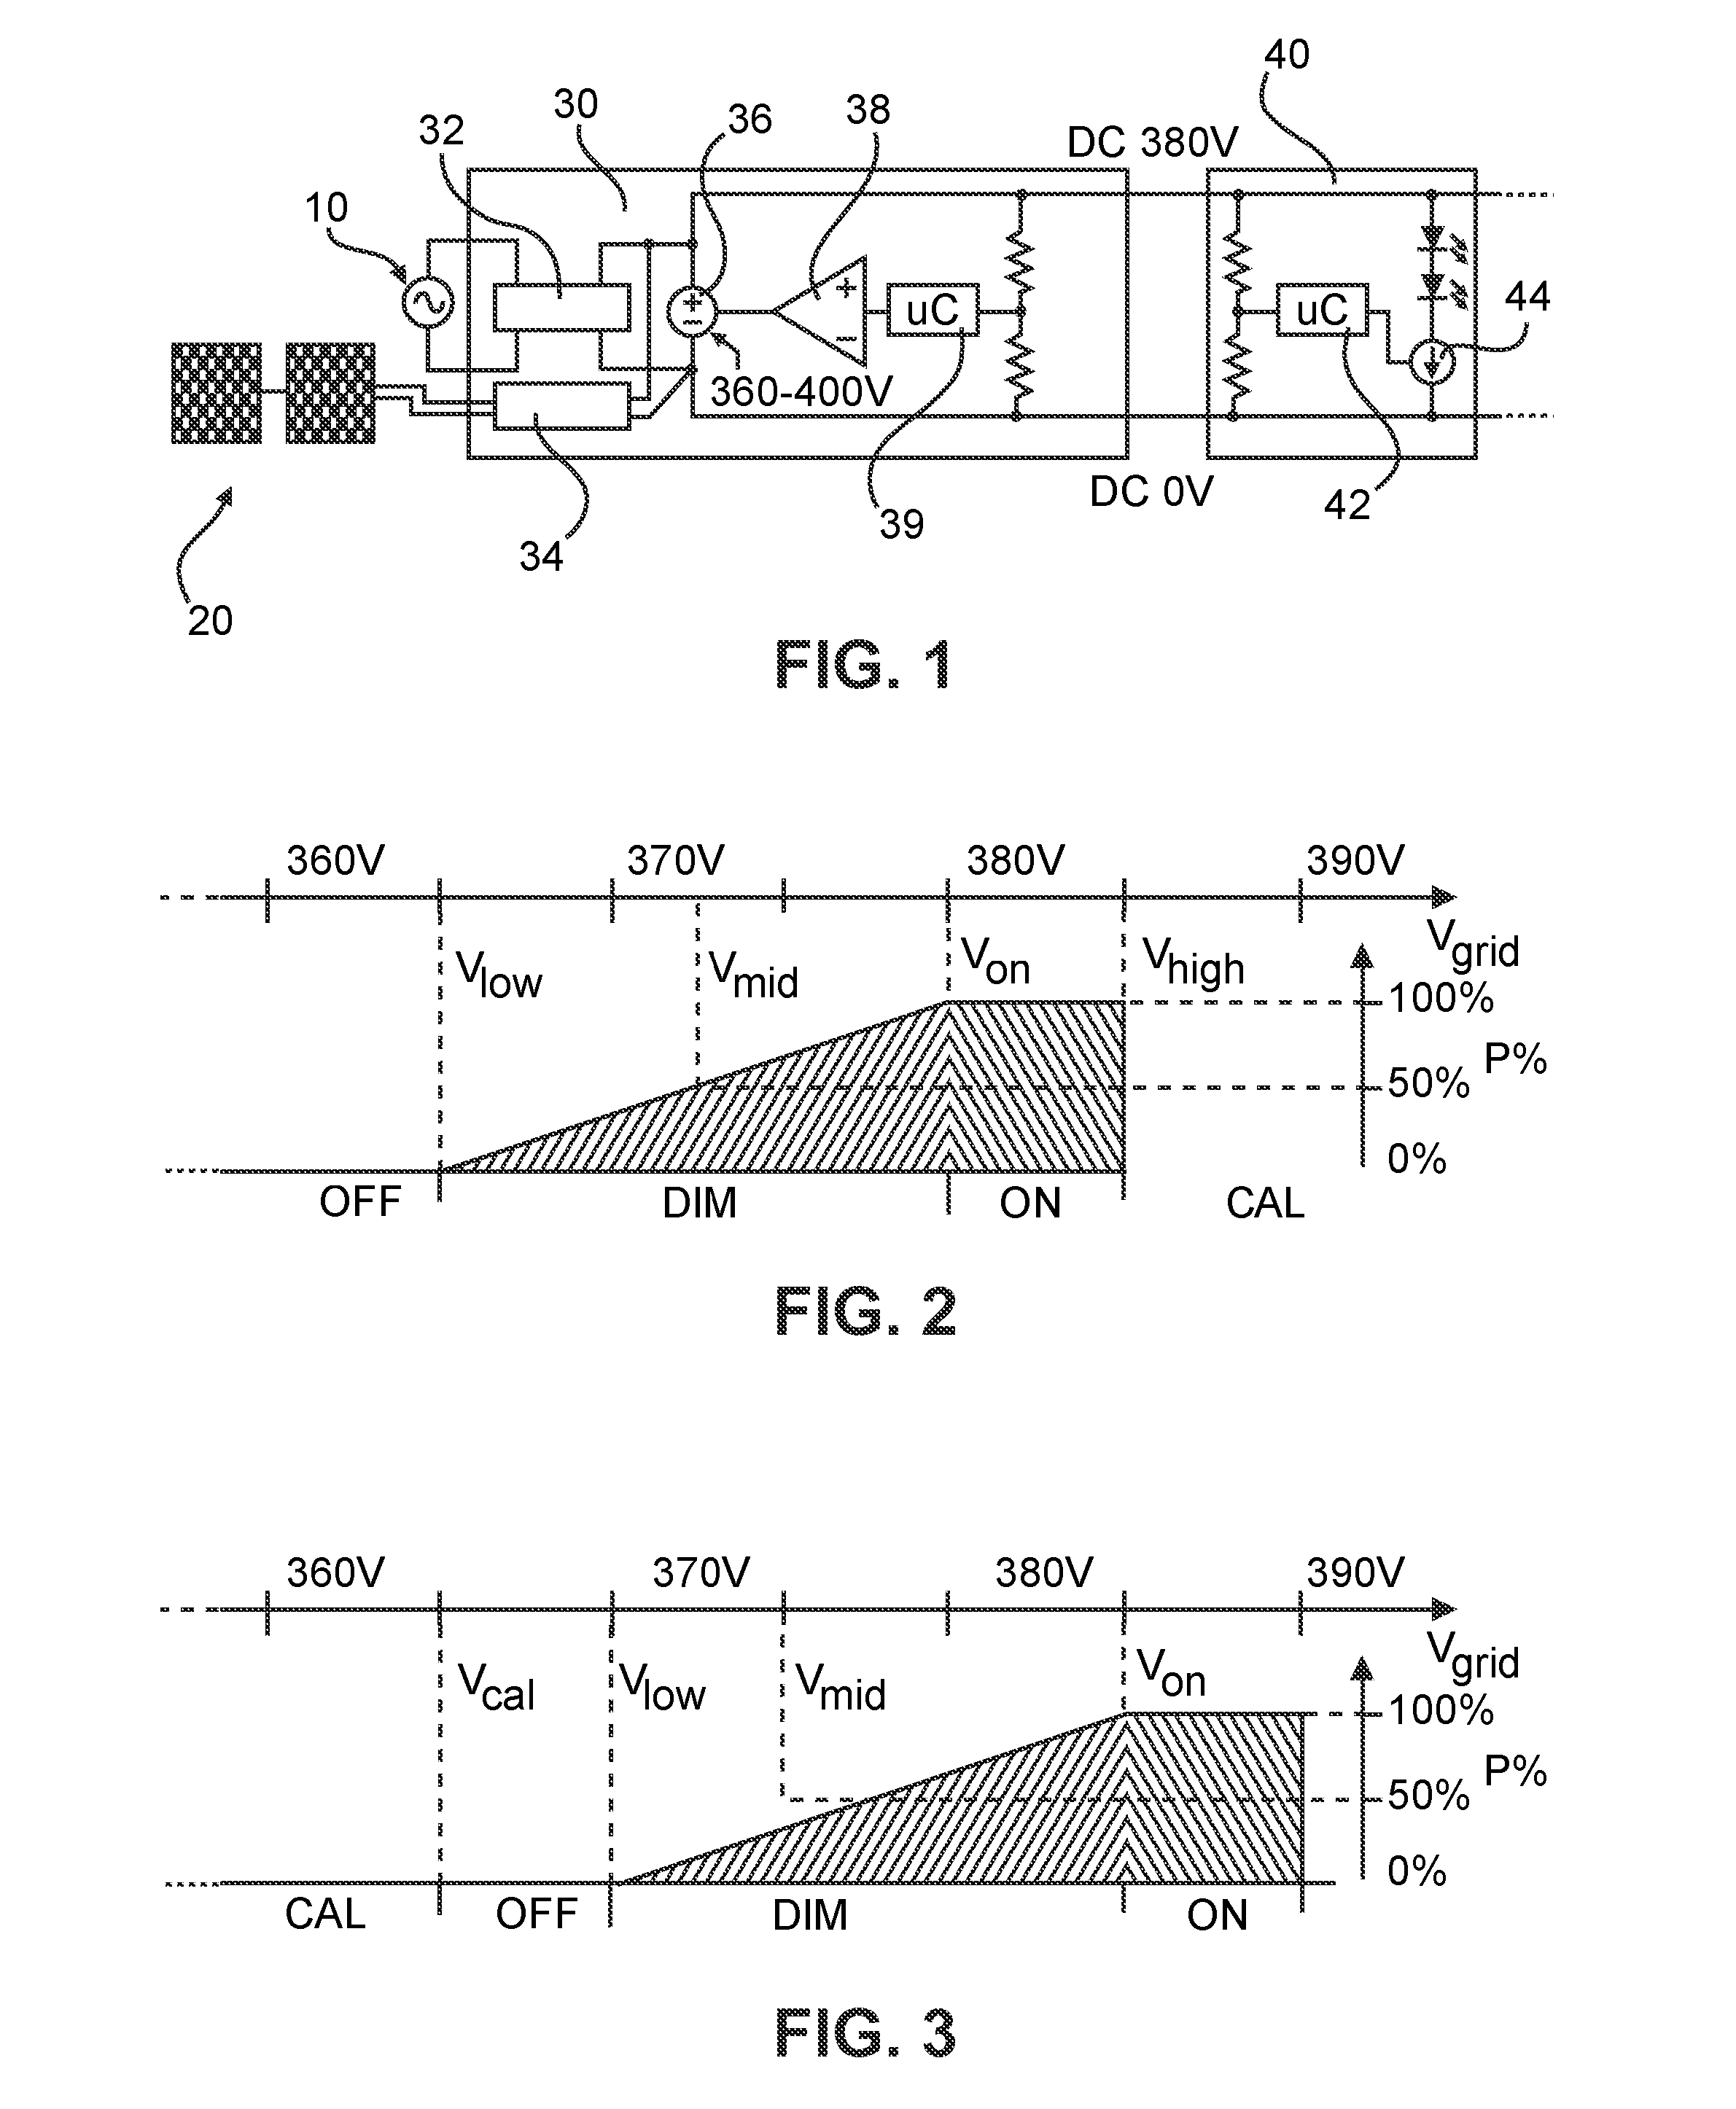 Signal-level based control of power grid load systems